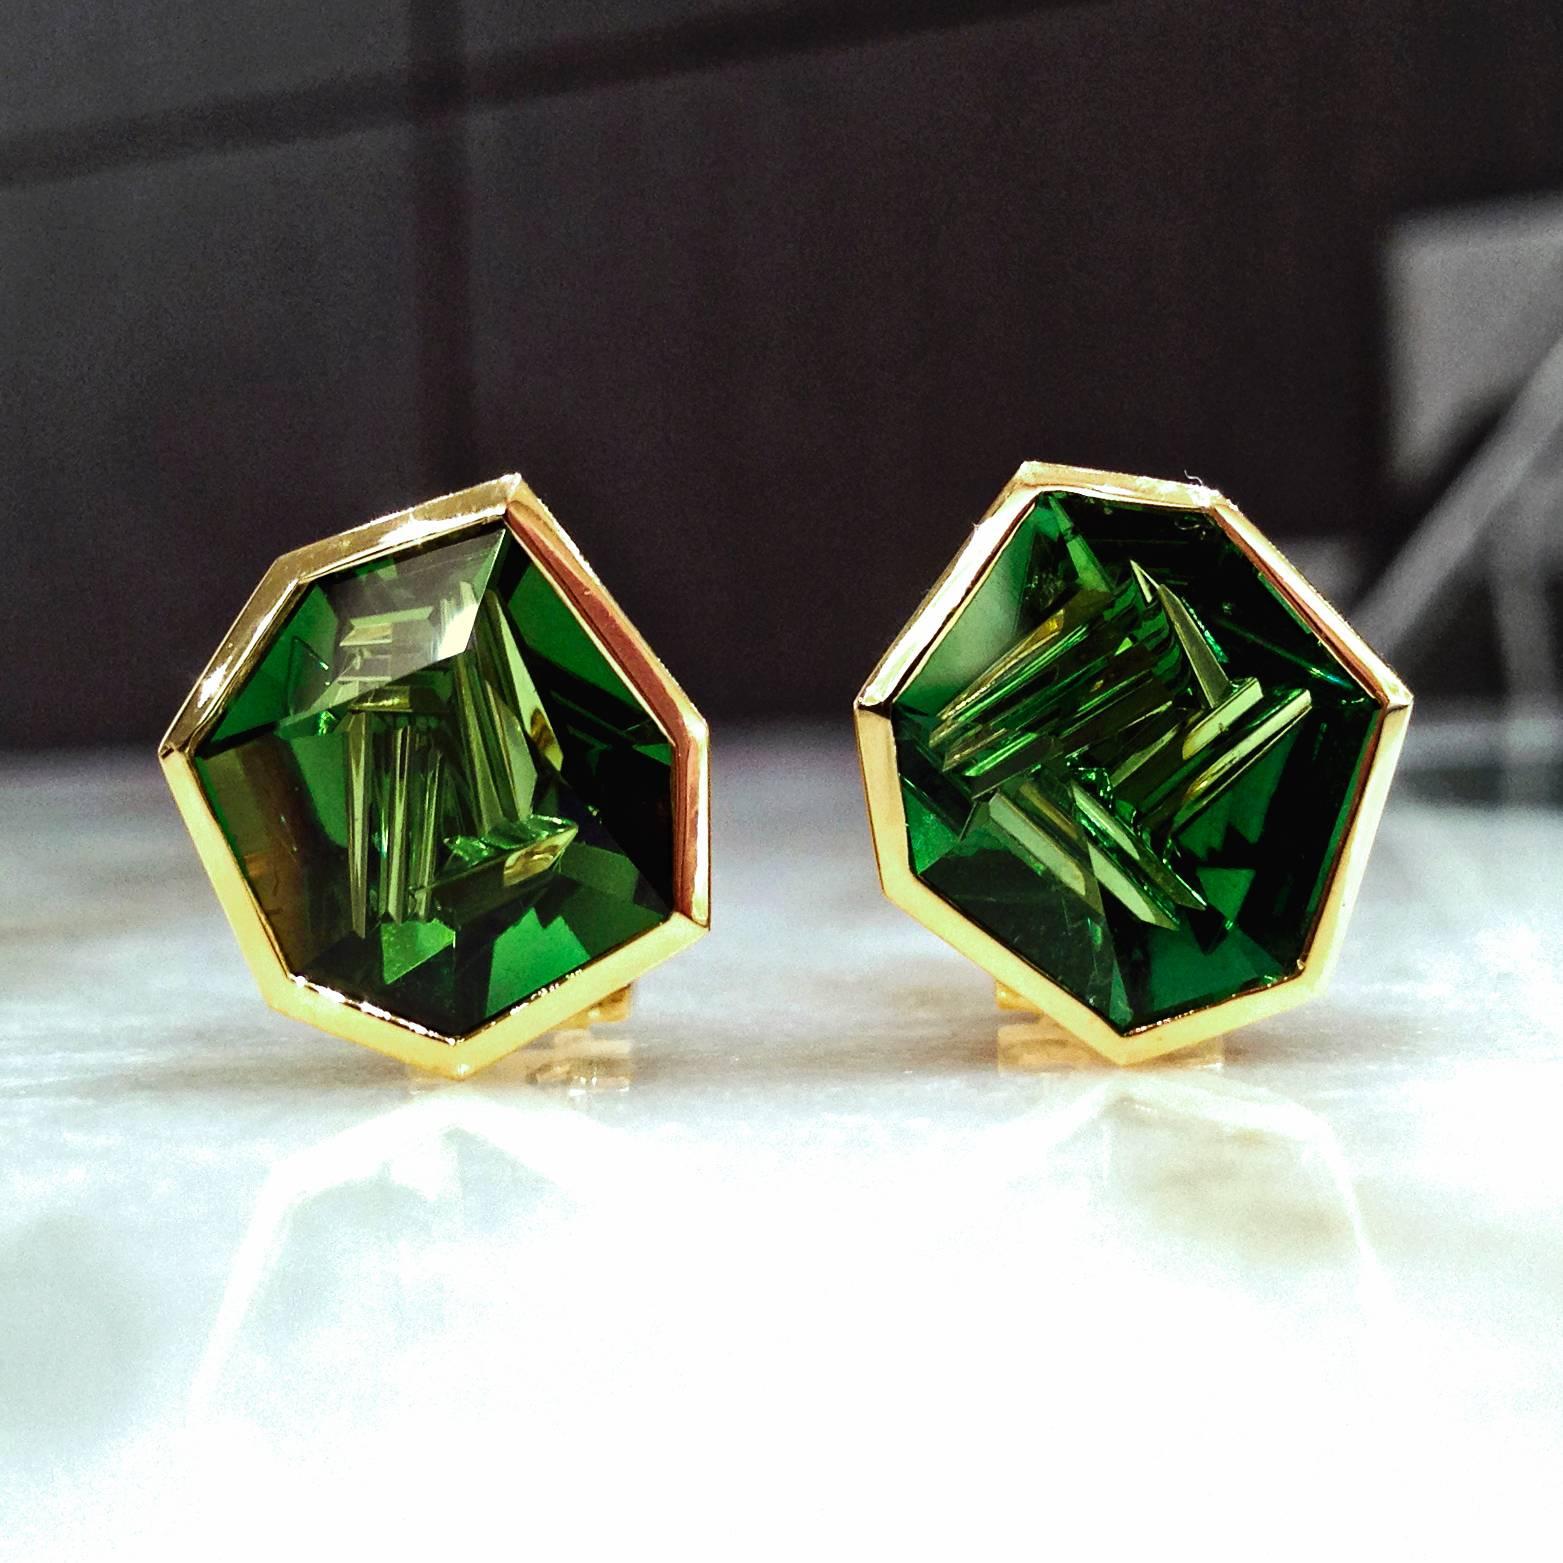 One-of-a-Kind Earrings handcrafted by Atelier Munsteiner in satin-finished 18k yellow gold with 8.18 total carats of externally faceted and internally abstract-cut green tourmaline and 18k yellow gold posts and clip. 